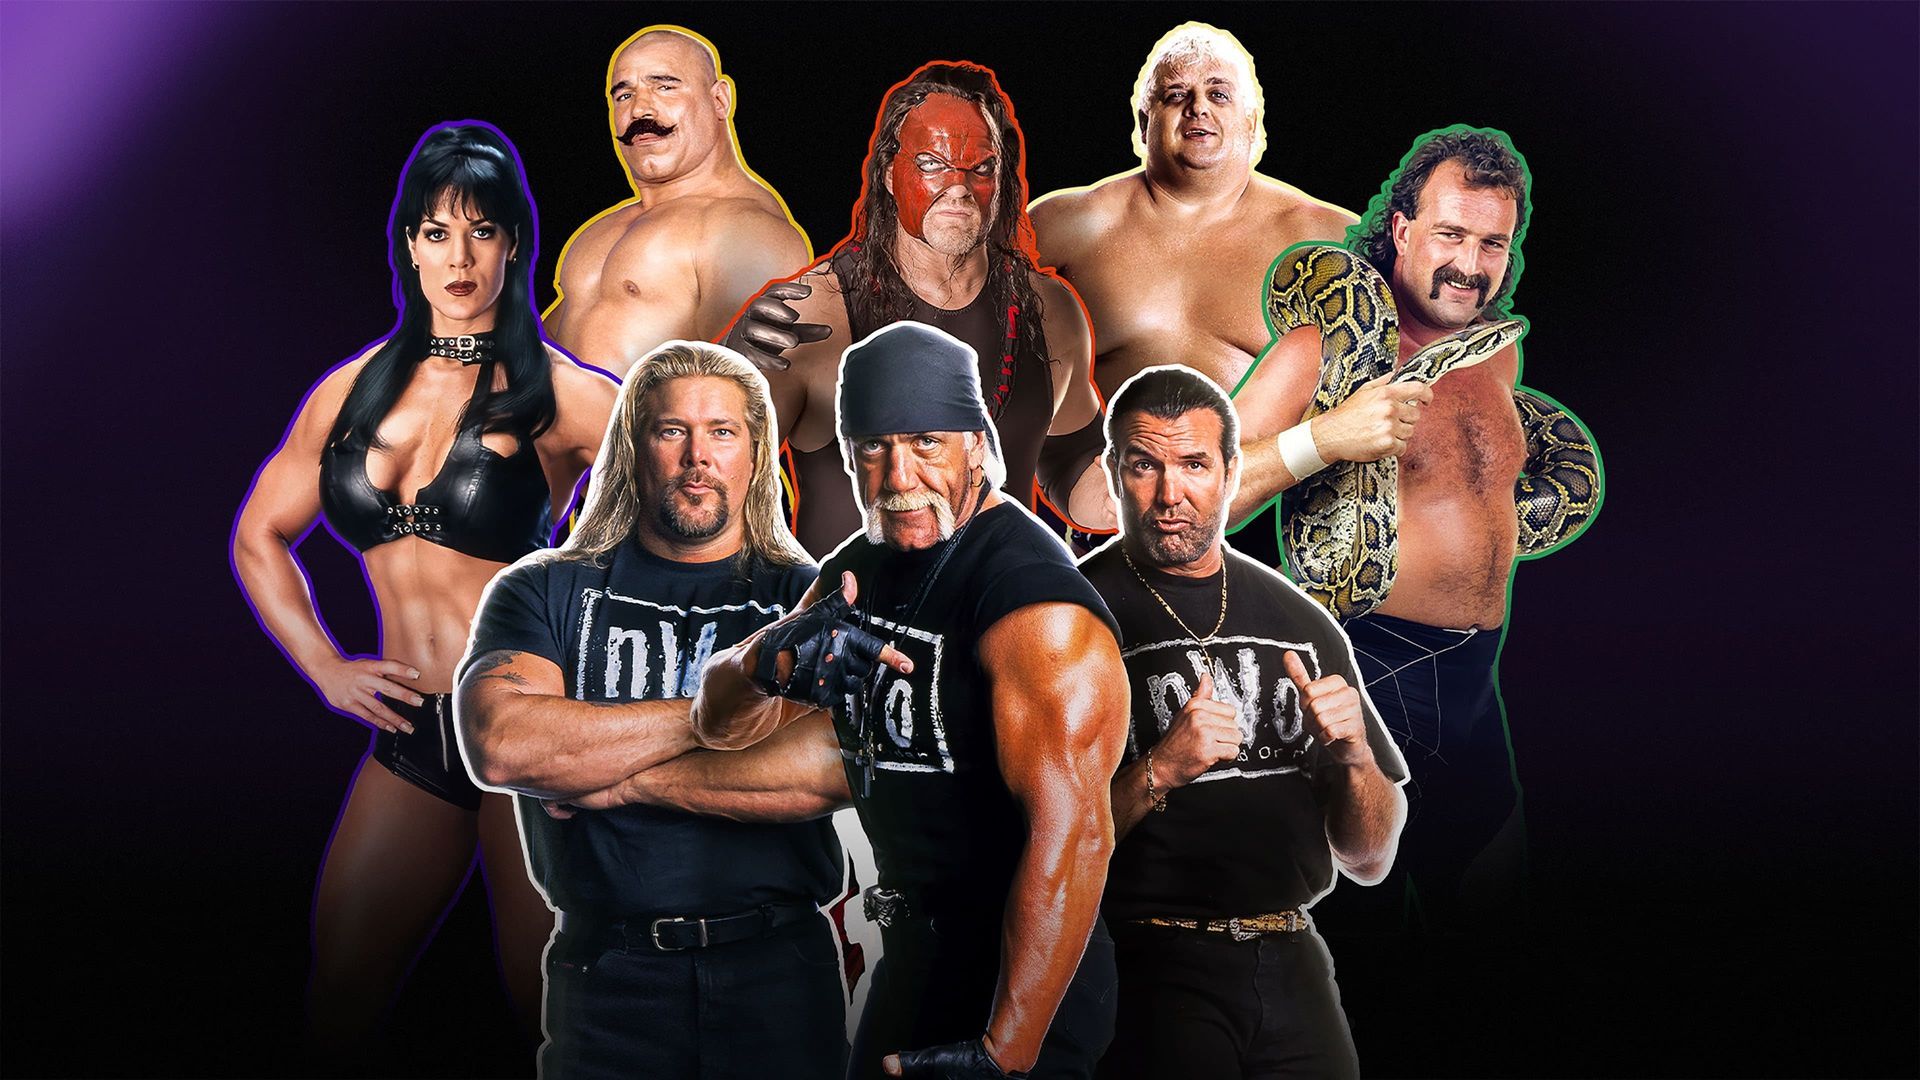 where can i watch biography wwe legends in uk